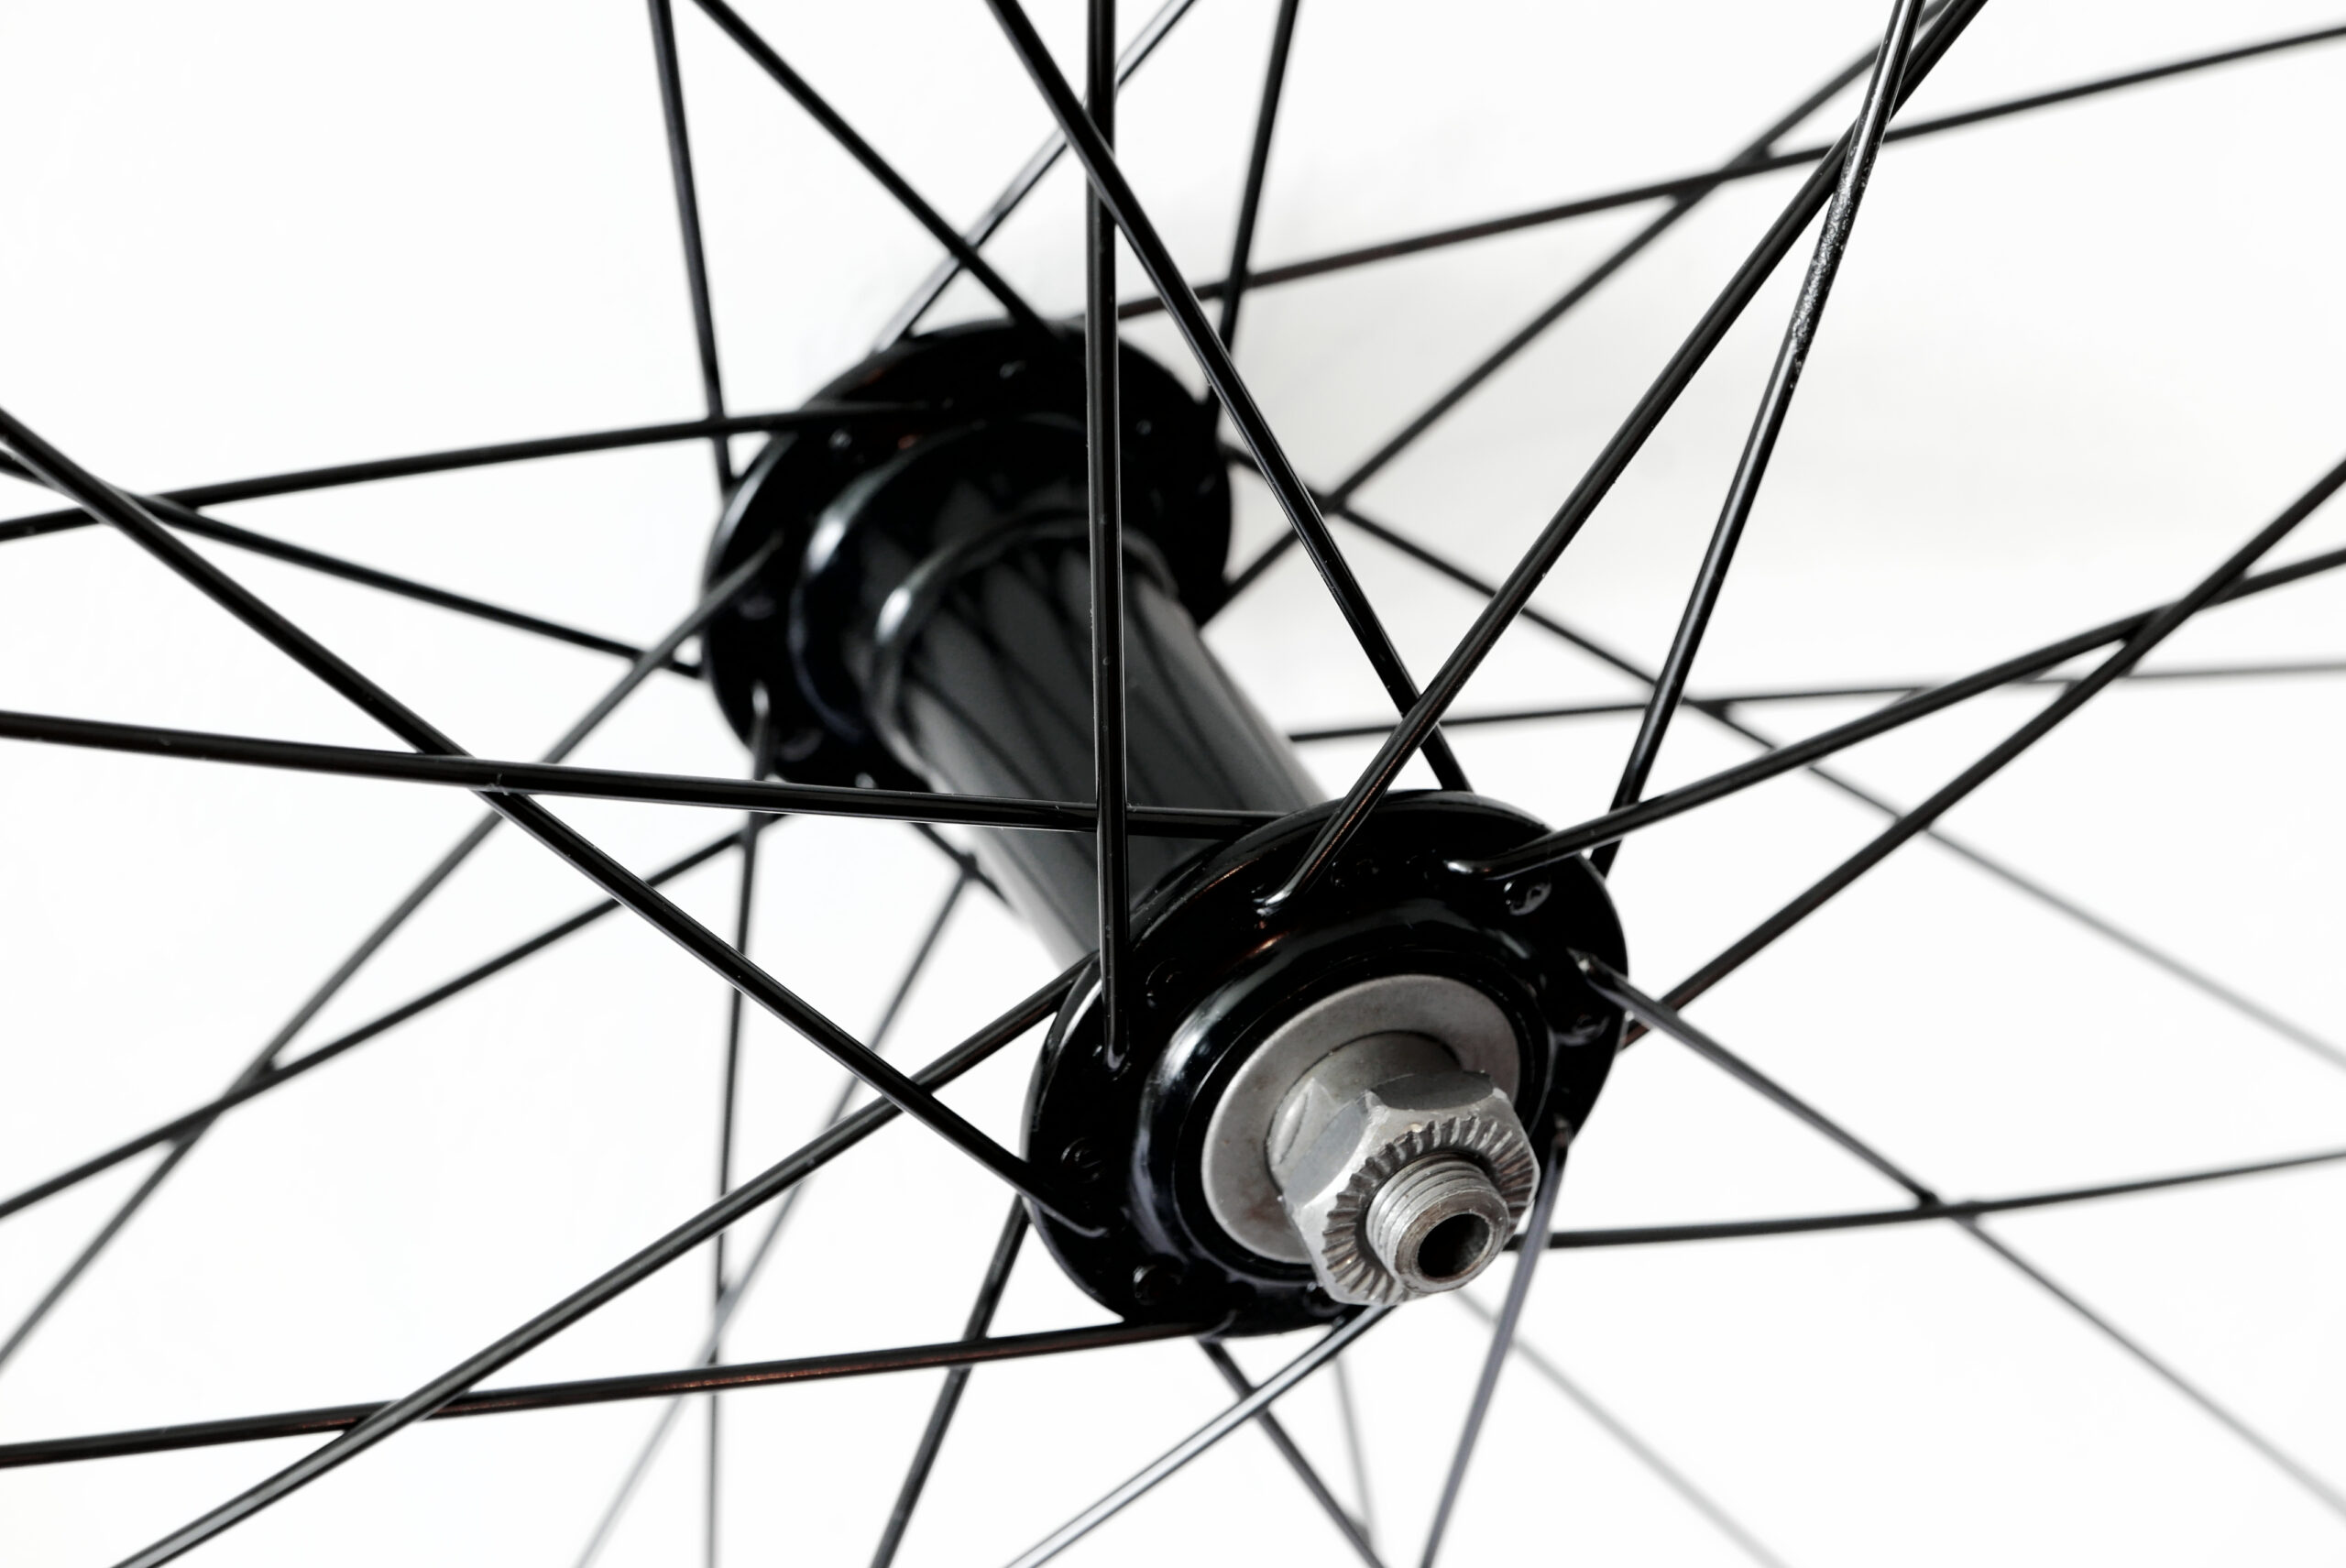 Detail,Of,Front,Bicycle,Wheel,,Hub,And,Spokes